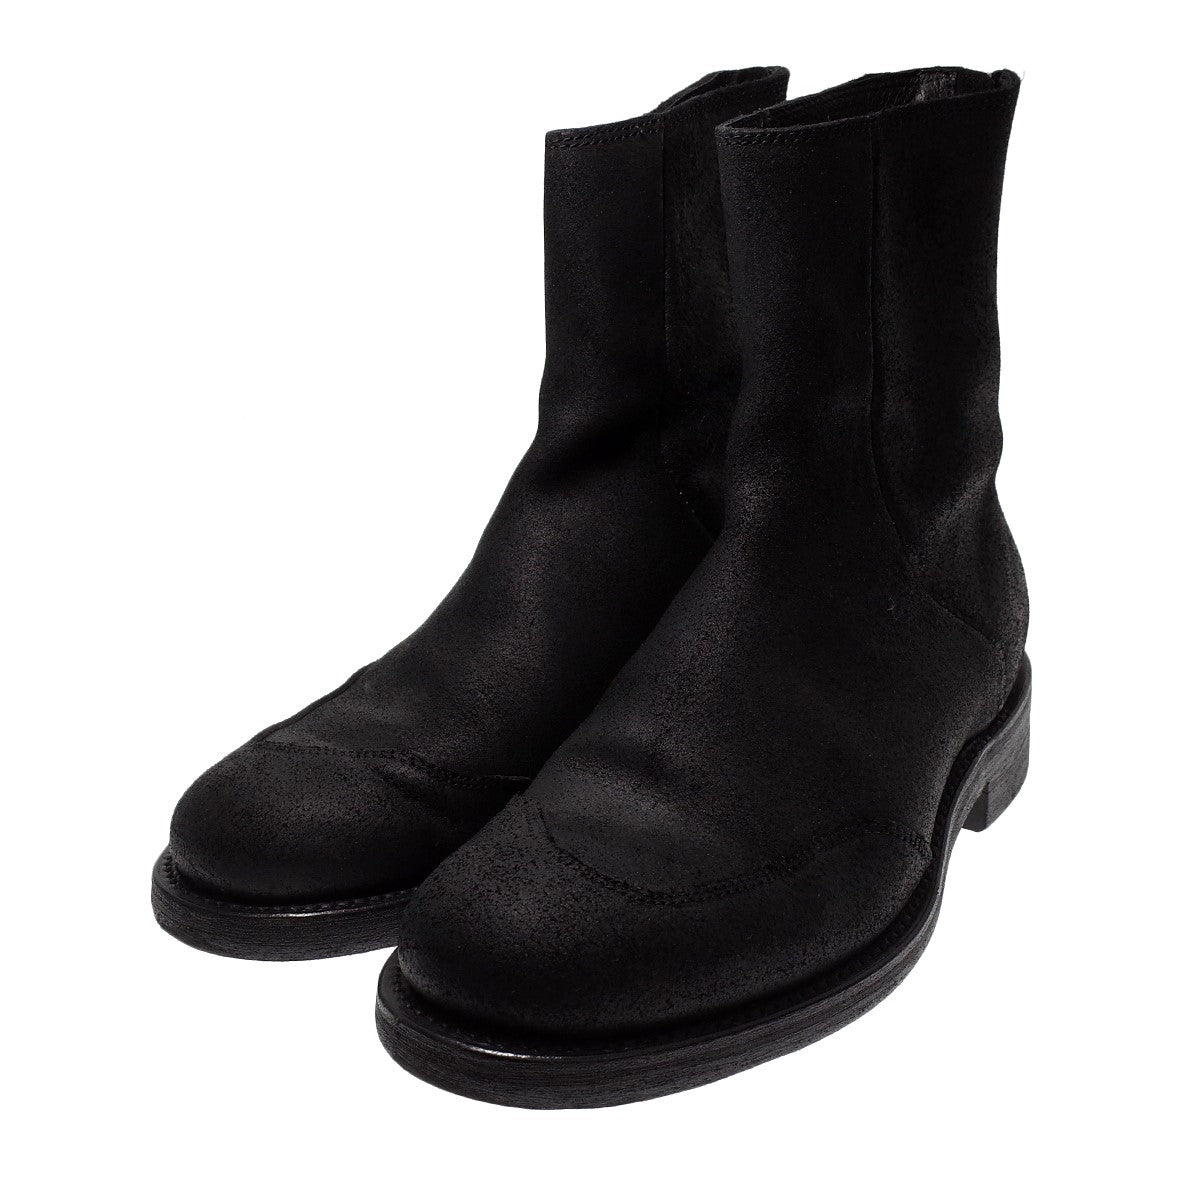 【RB-230】BACK ZIP BOOTS　バックジップブーツ